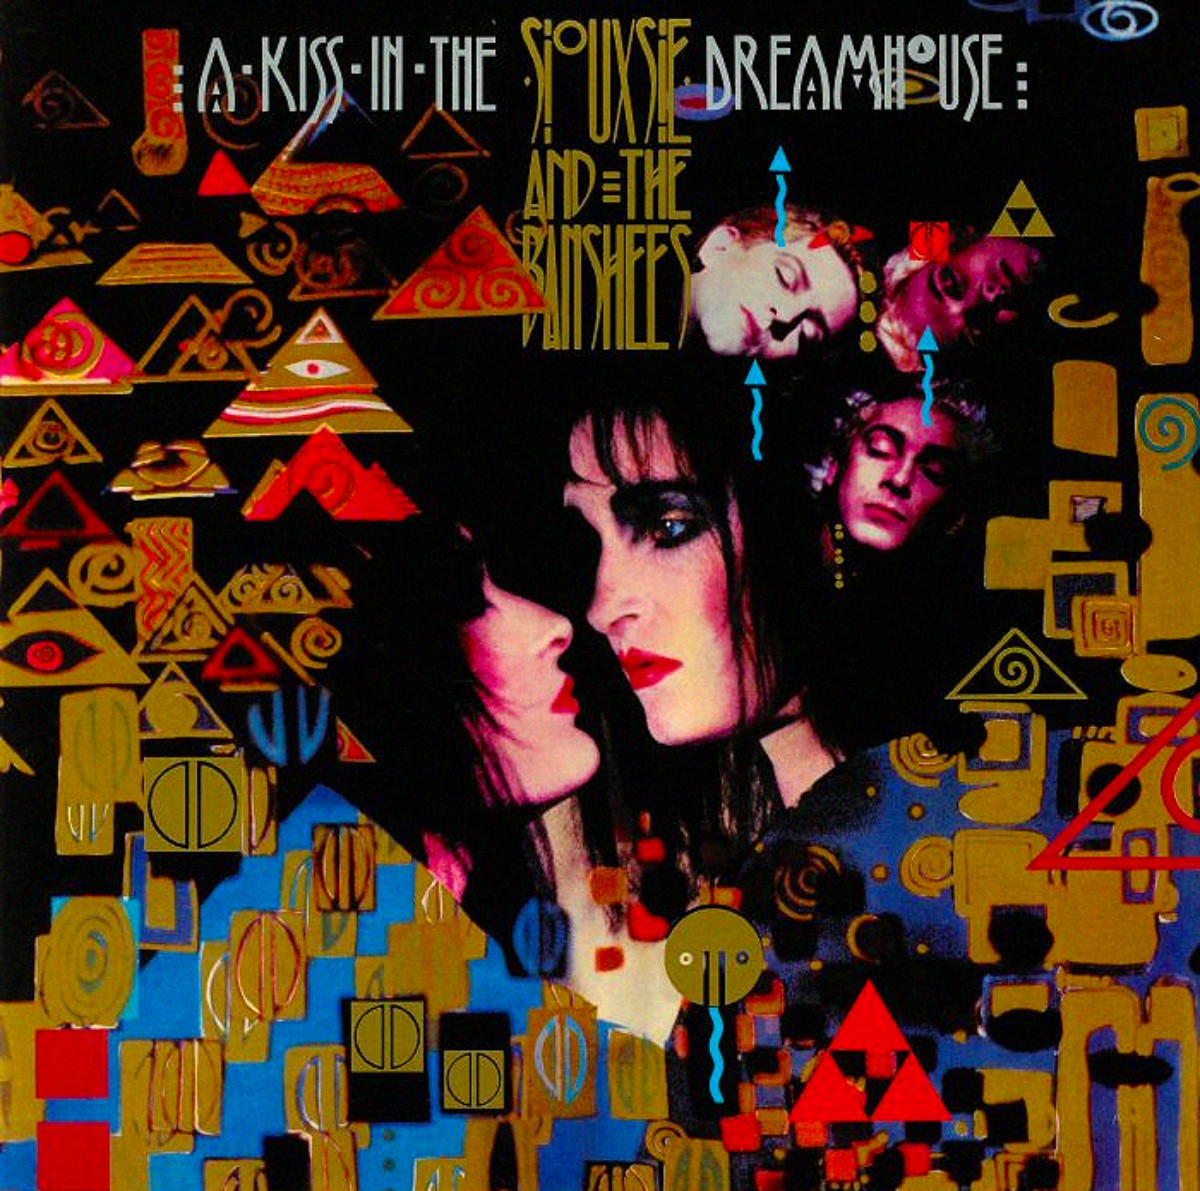 Siouxsie And The Banshees，專輯“A Kiss in the Dreamhouse”（1982 年）